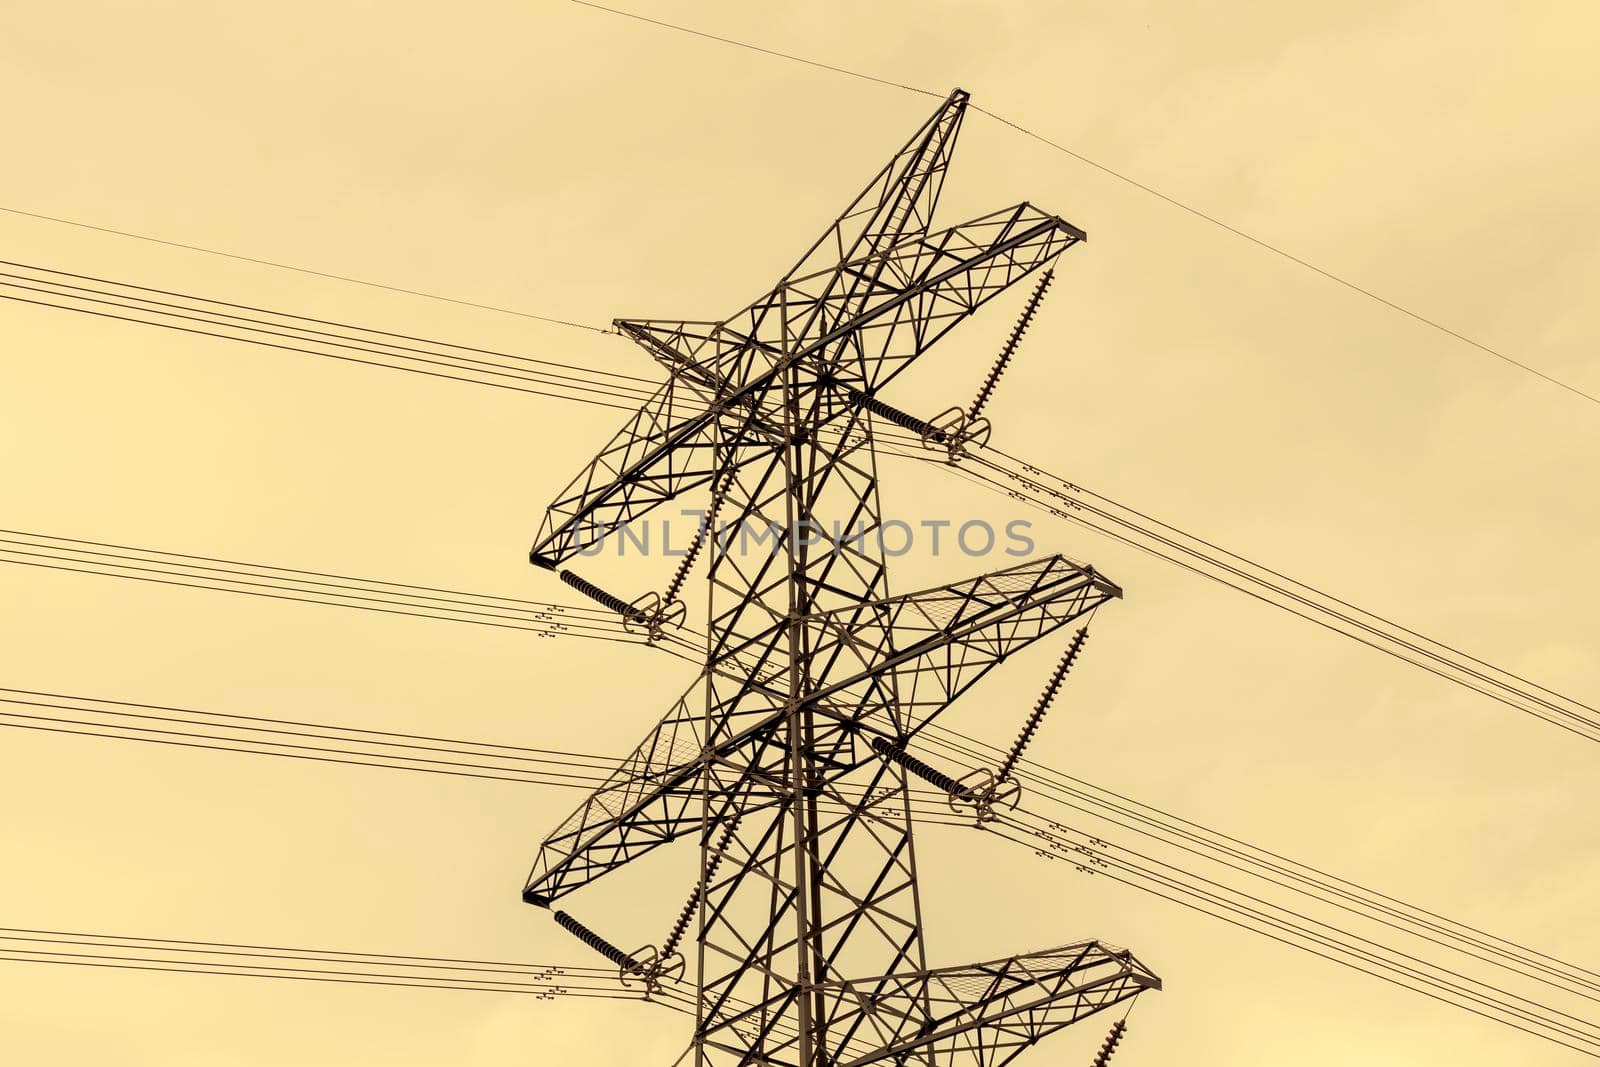 Close up view of the upper section of a steel electrical Transmission Tower and the associated transmission cables and connectors